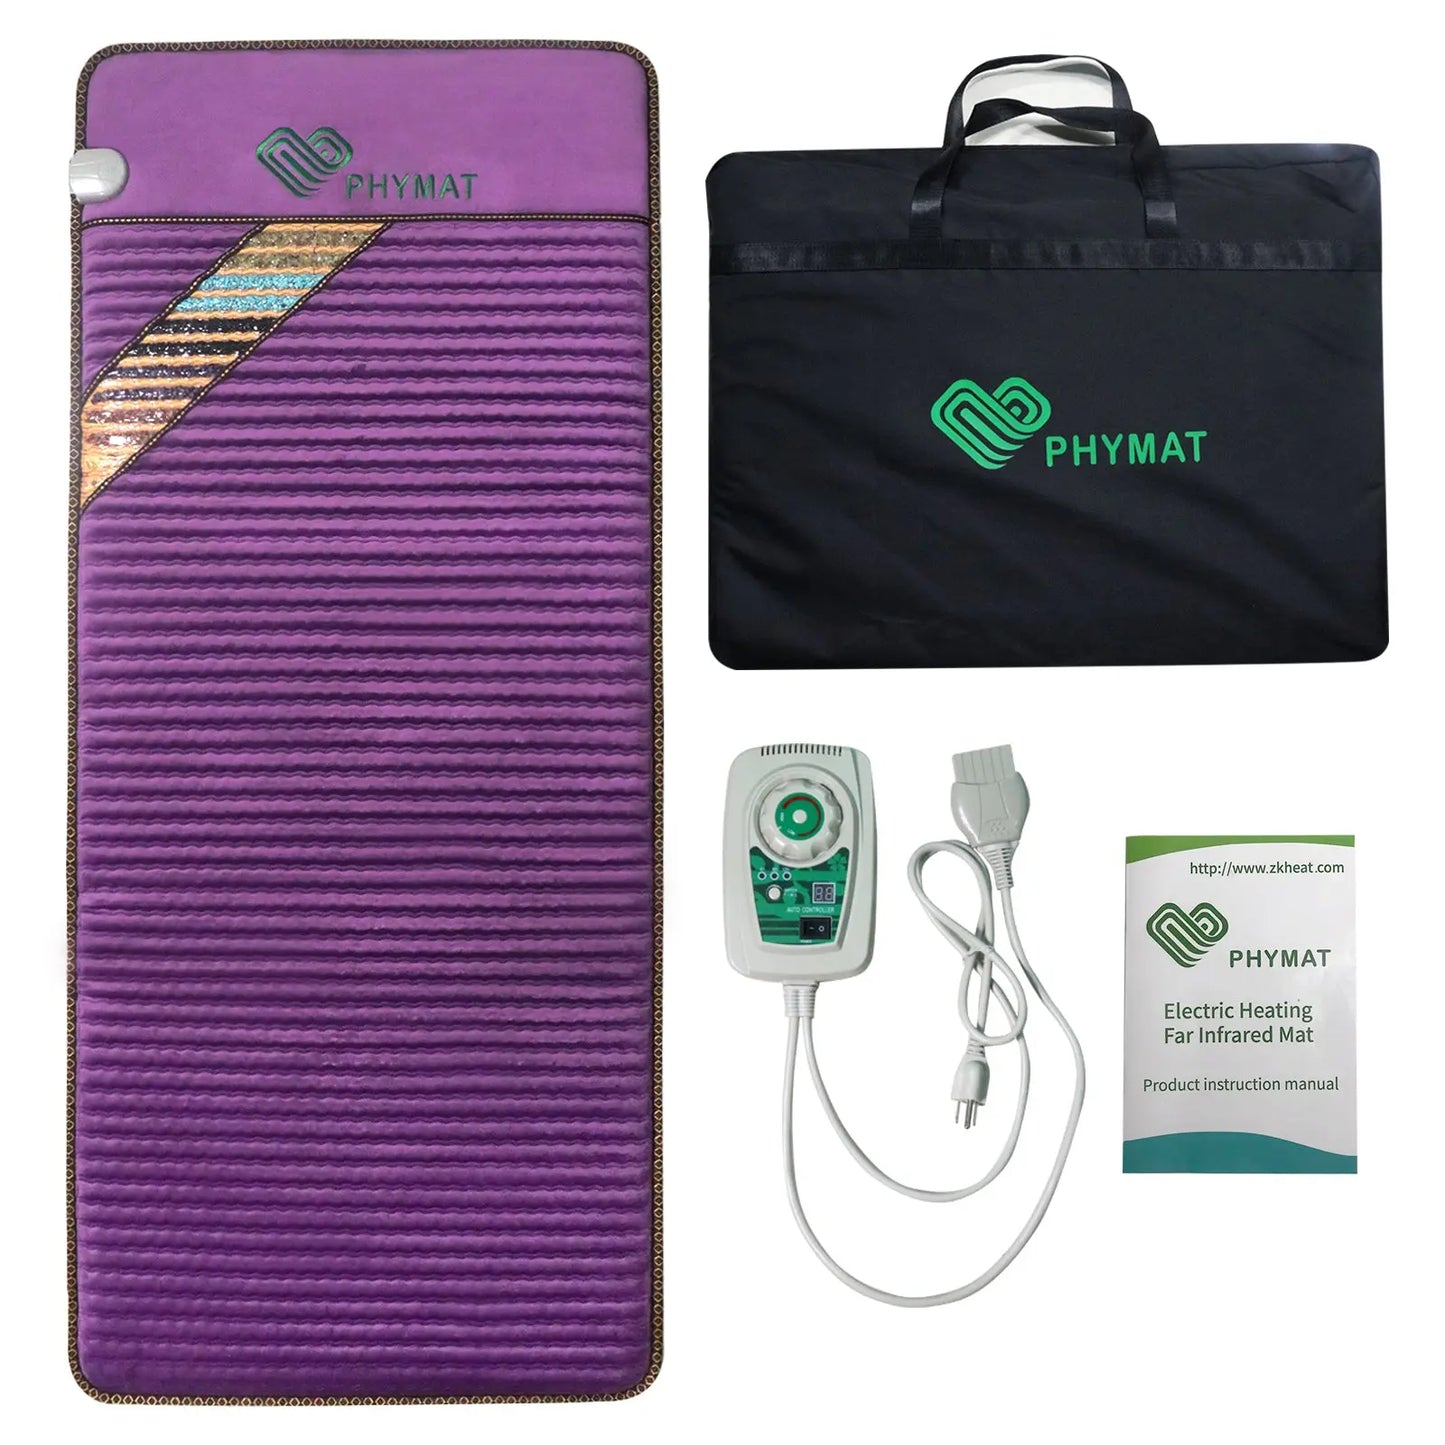 PHYMAT Far Infrared Amethyst Heating Pad (67"x27")- 5 Color Natural Crystal PHYMAT Life